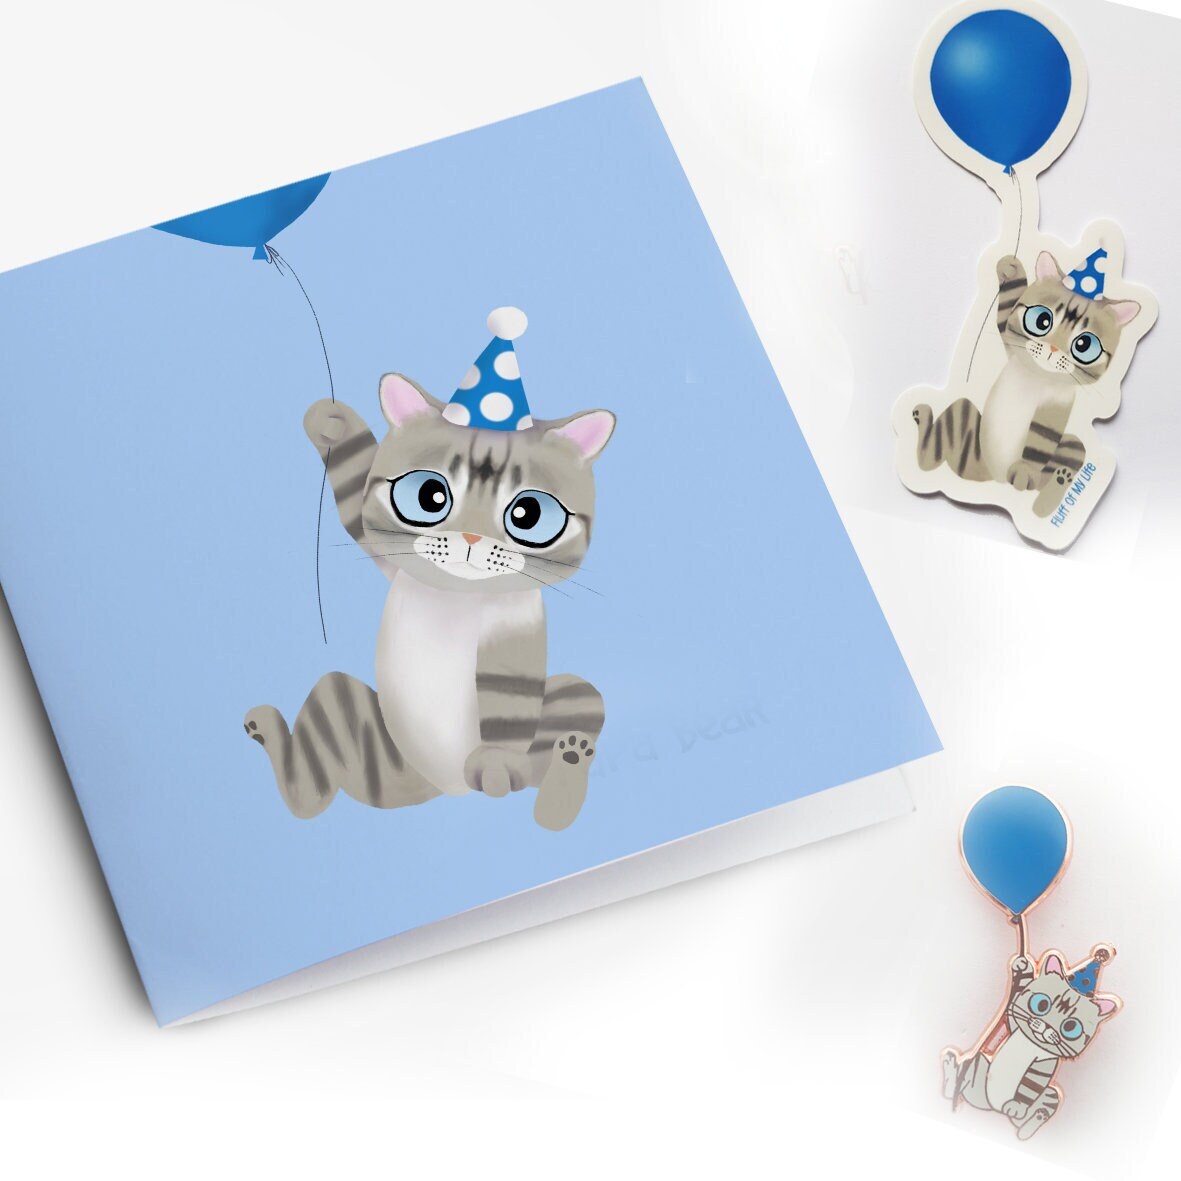 Roo&#39;s First Birthday Enamel Pin (hard enamel pin, cat with party hat and balloon), Pins, Brooches & Lapel Pins